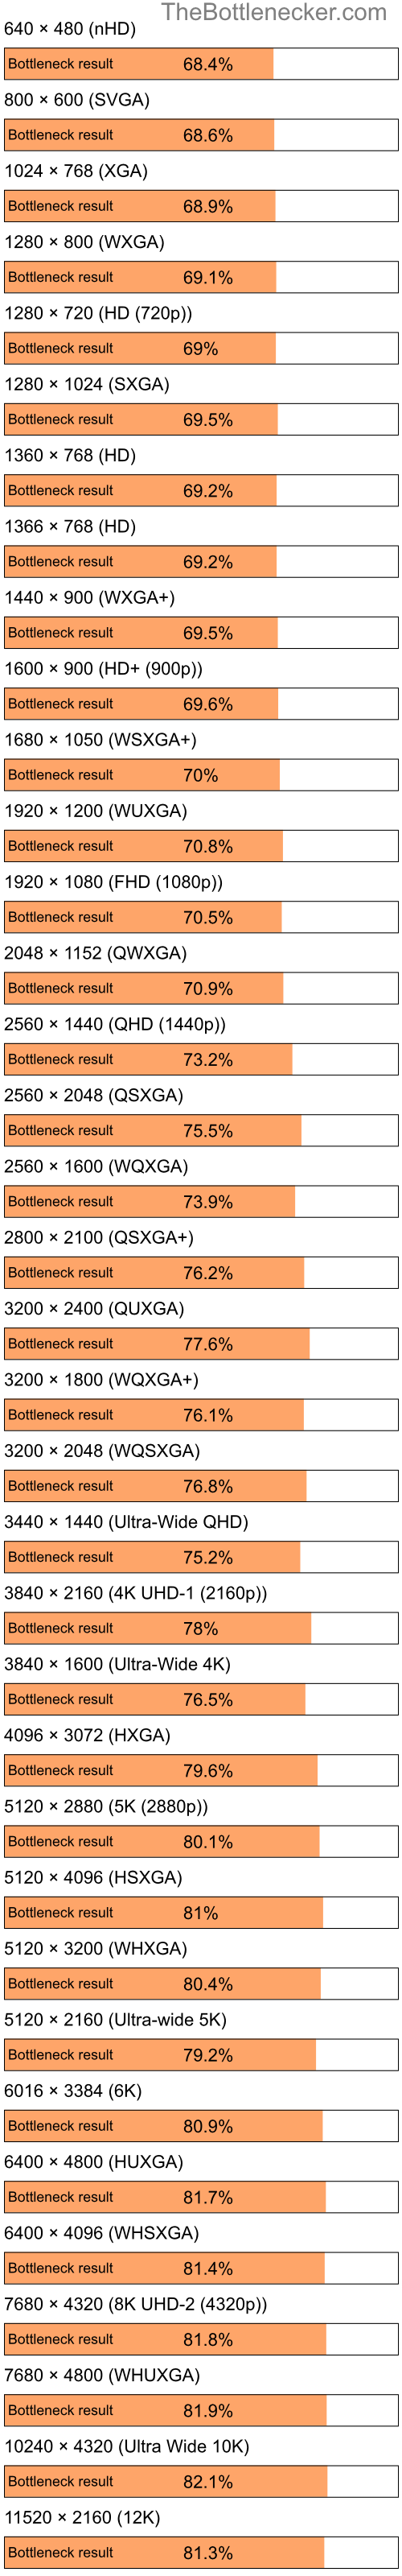 Bottleneck results by resolution for Intel Atom N280 and AMD Radeon HD 3200 in7 Days to Die